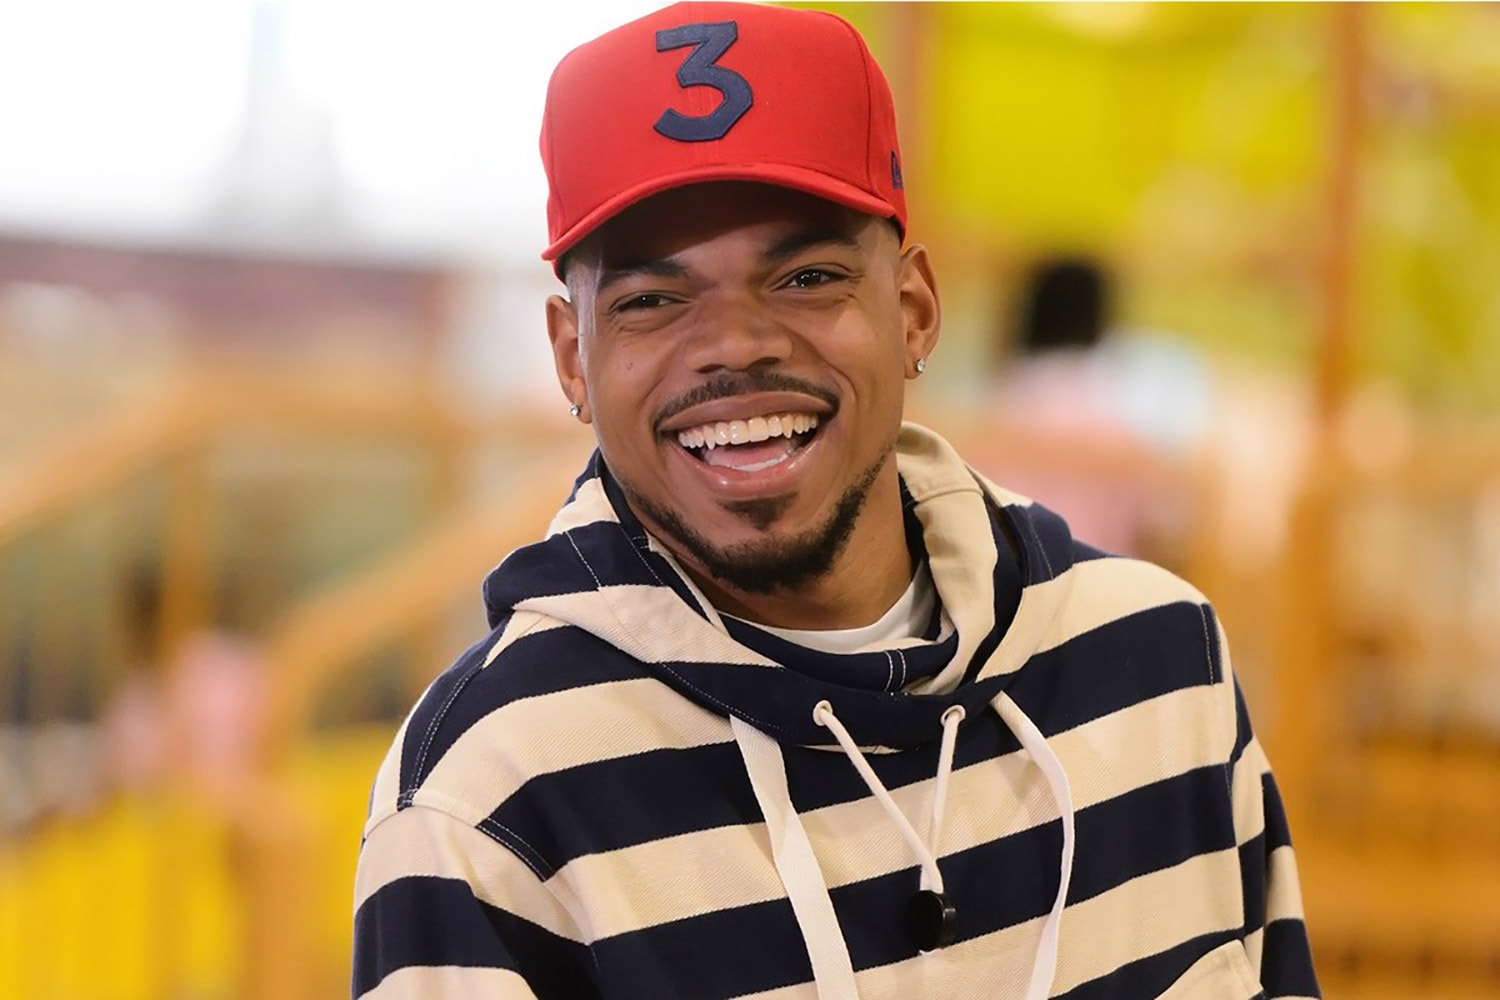 Chance The Rapper が“あのキャップ”で6億円を稼いだと明かす CHANCE THE RAPPER SAYS HIS '3' HATS MADE HIM 6 million 